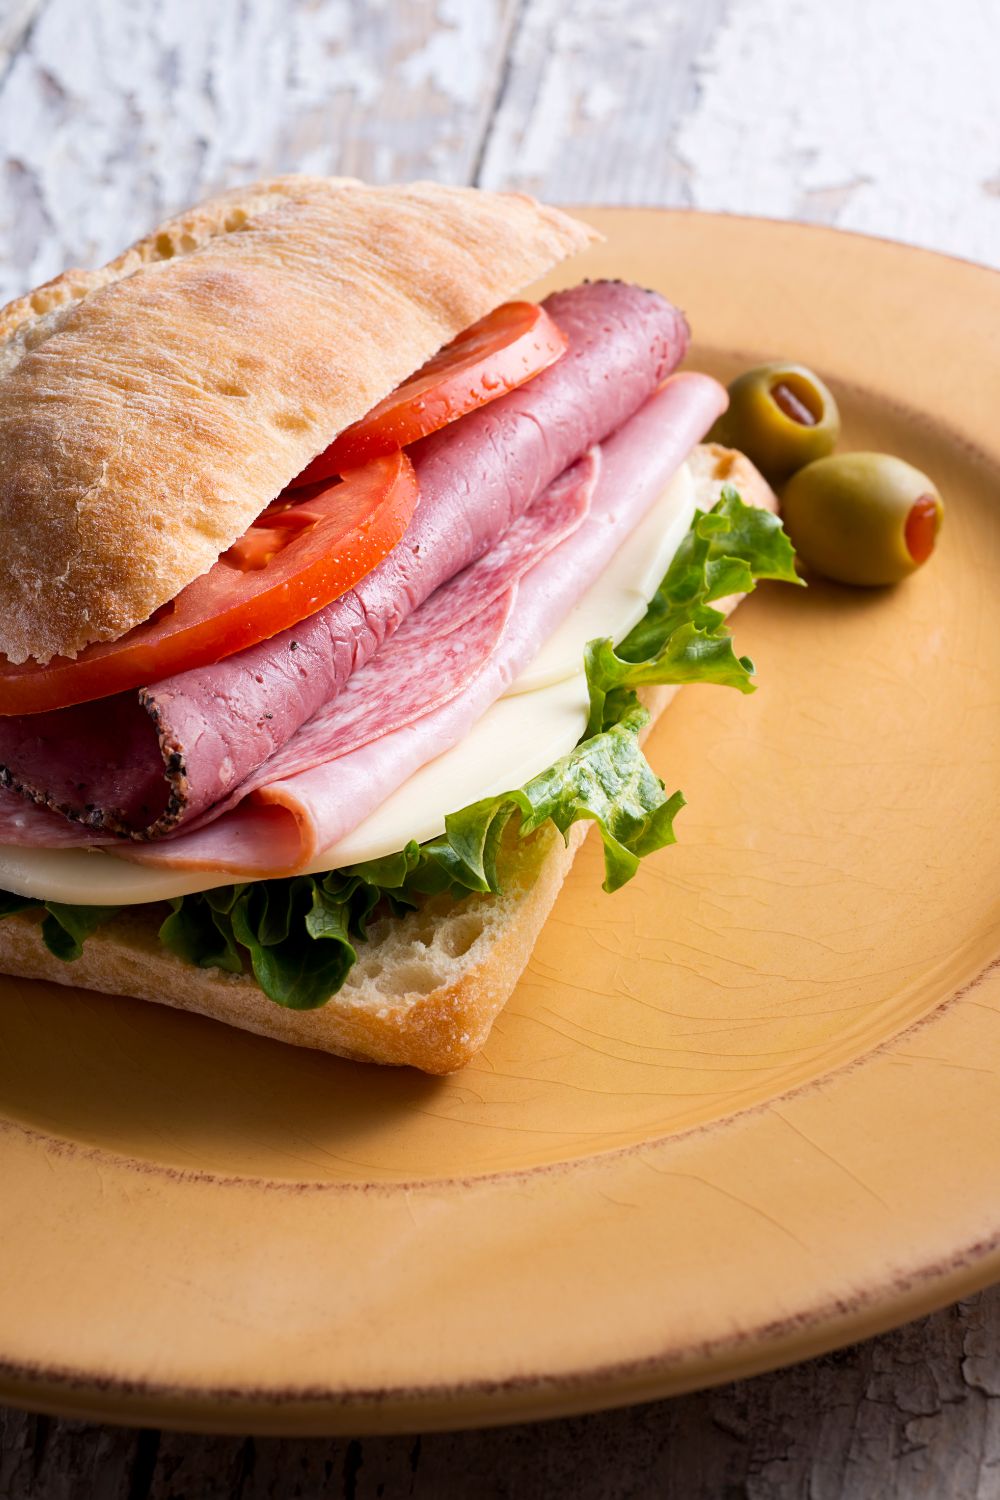 Mario Carbone's Italian sandwich on a plate with sliced tomato and lettuce